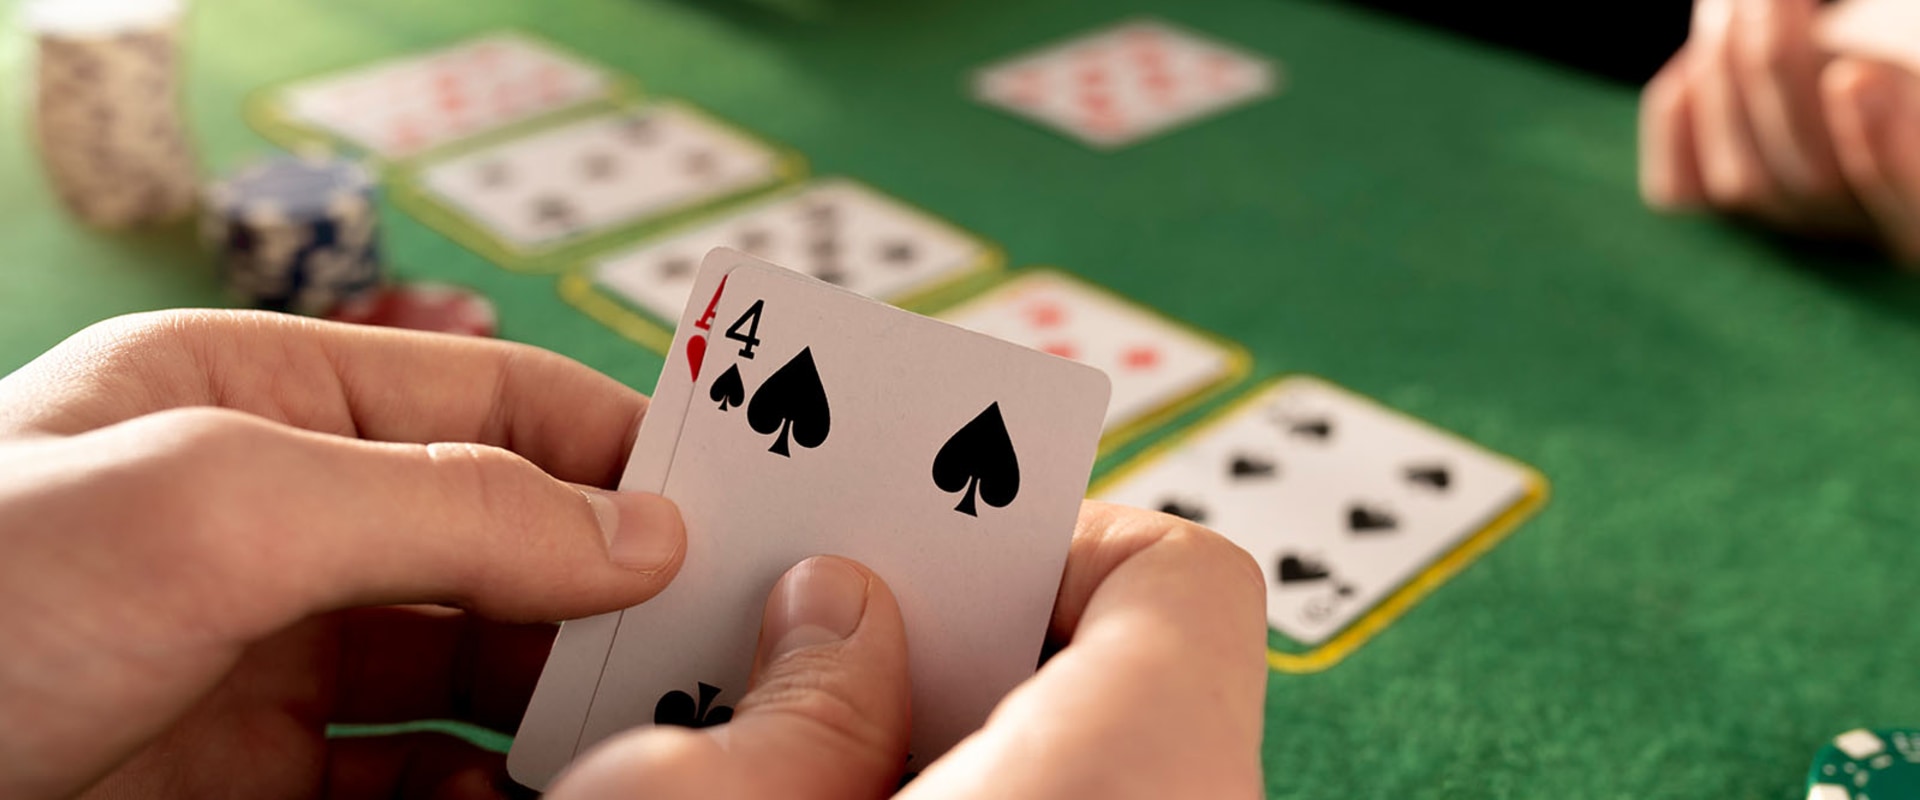 Obsession with Gambling: The Signs, Causes, and Solutions